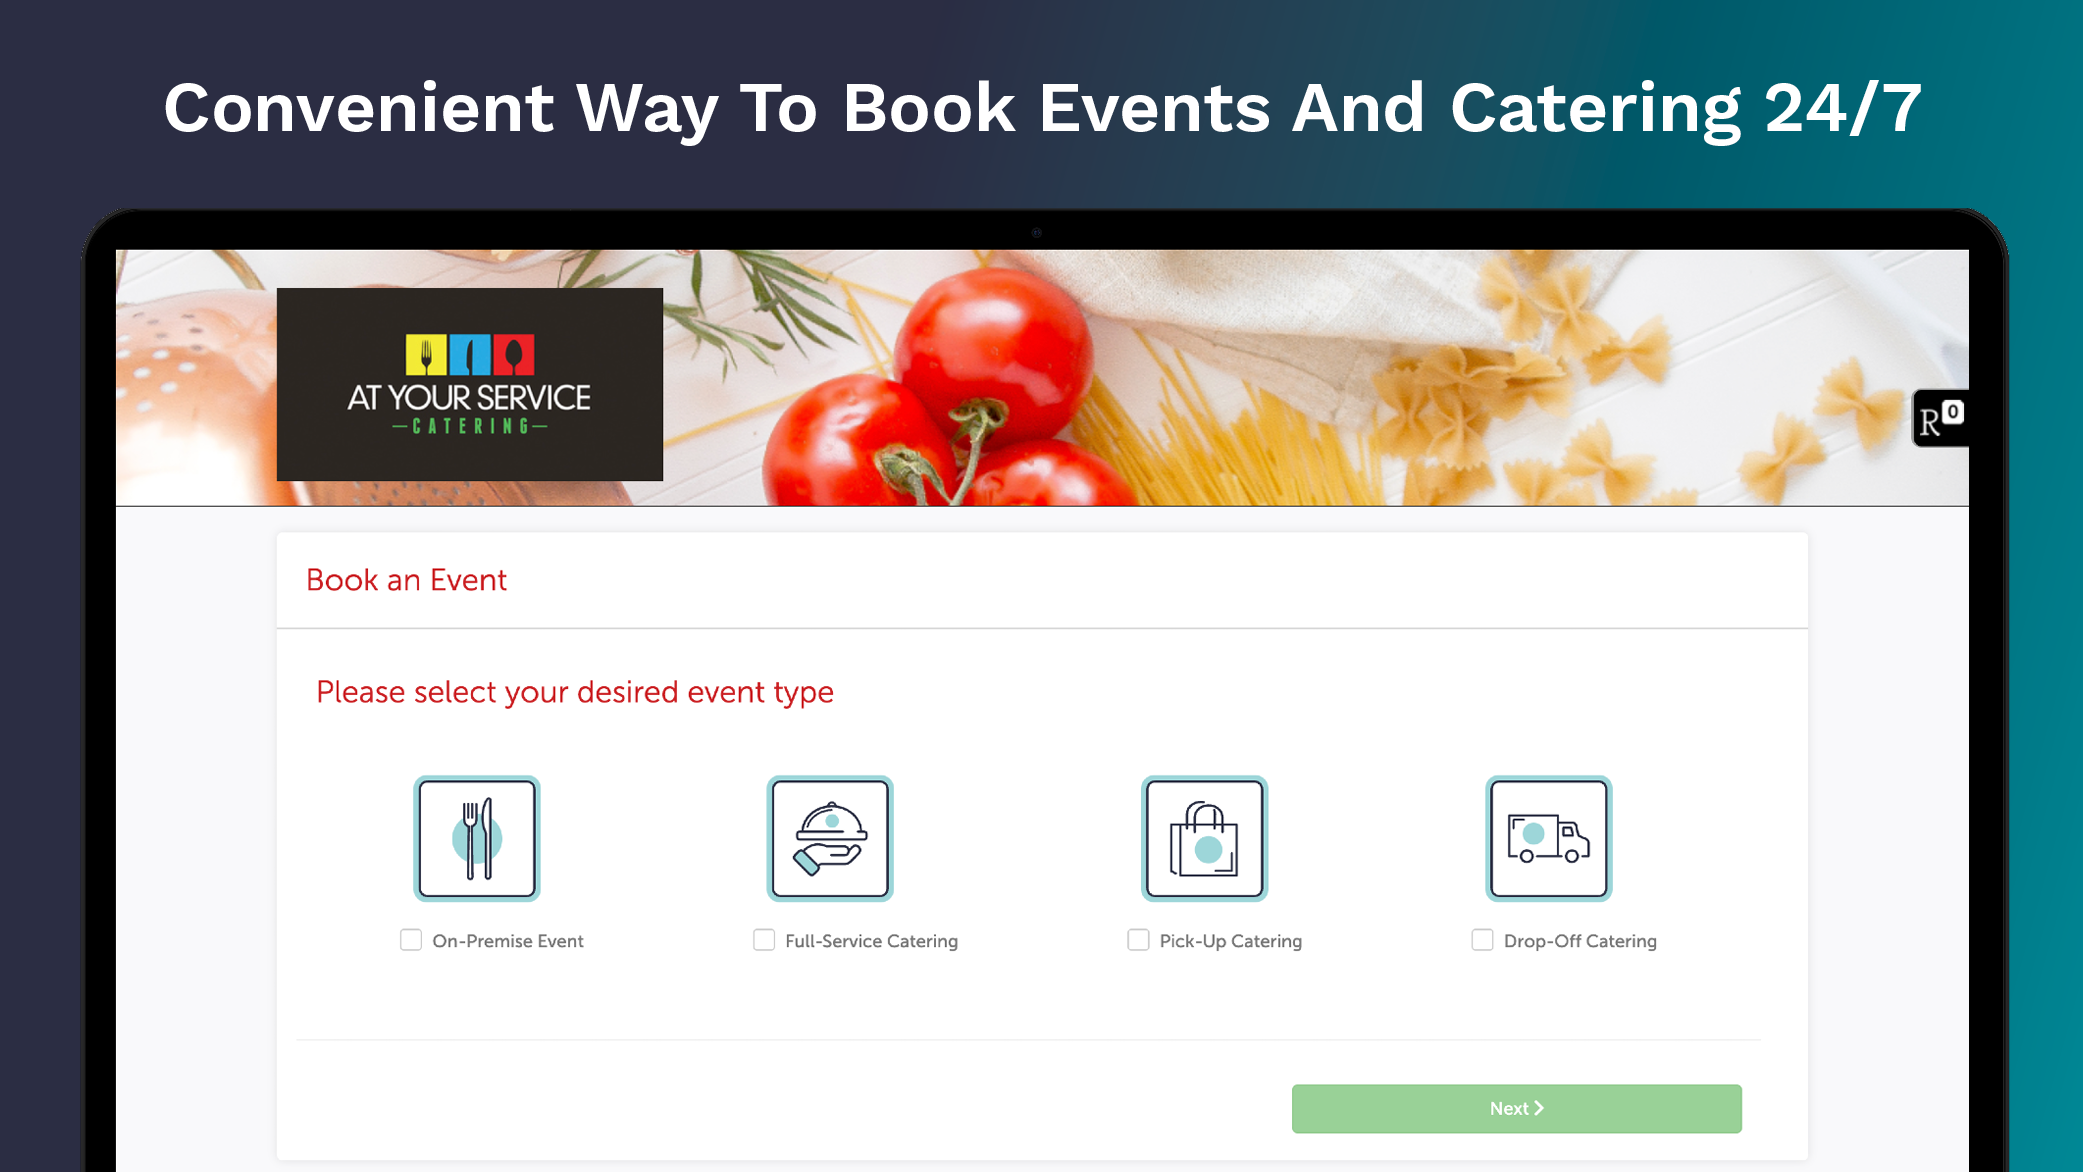 Tripleseat+ Direct enables any venue to offer their customers a zero-touch, frictionless and easy way to book, order, and pay for any off-premise catering event, on-premise event, or take out/delivery catering.